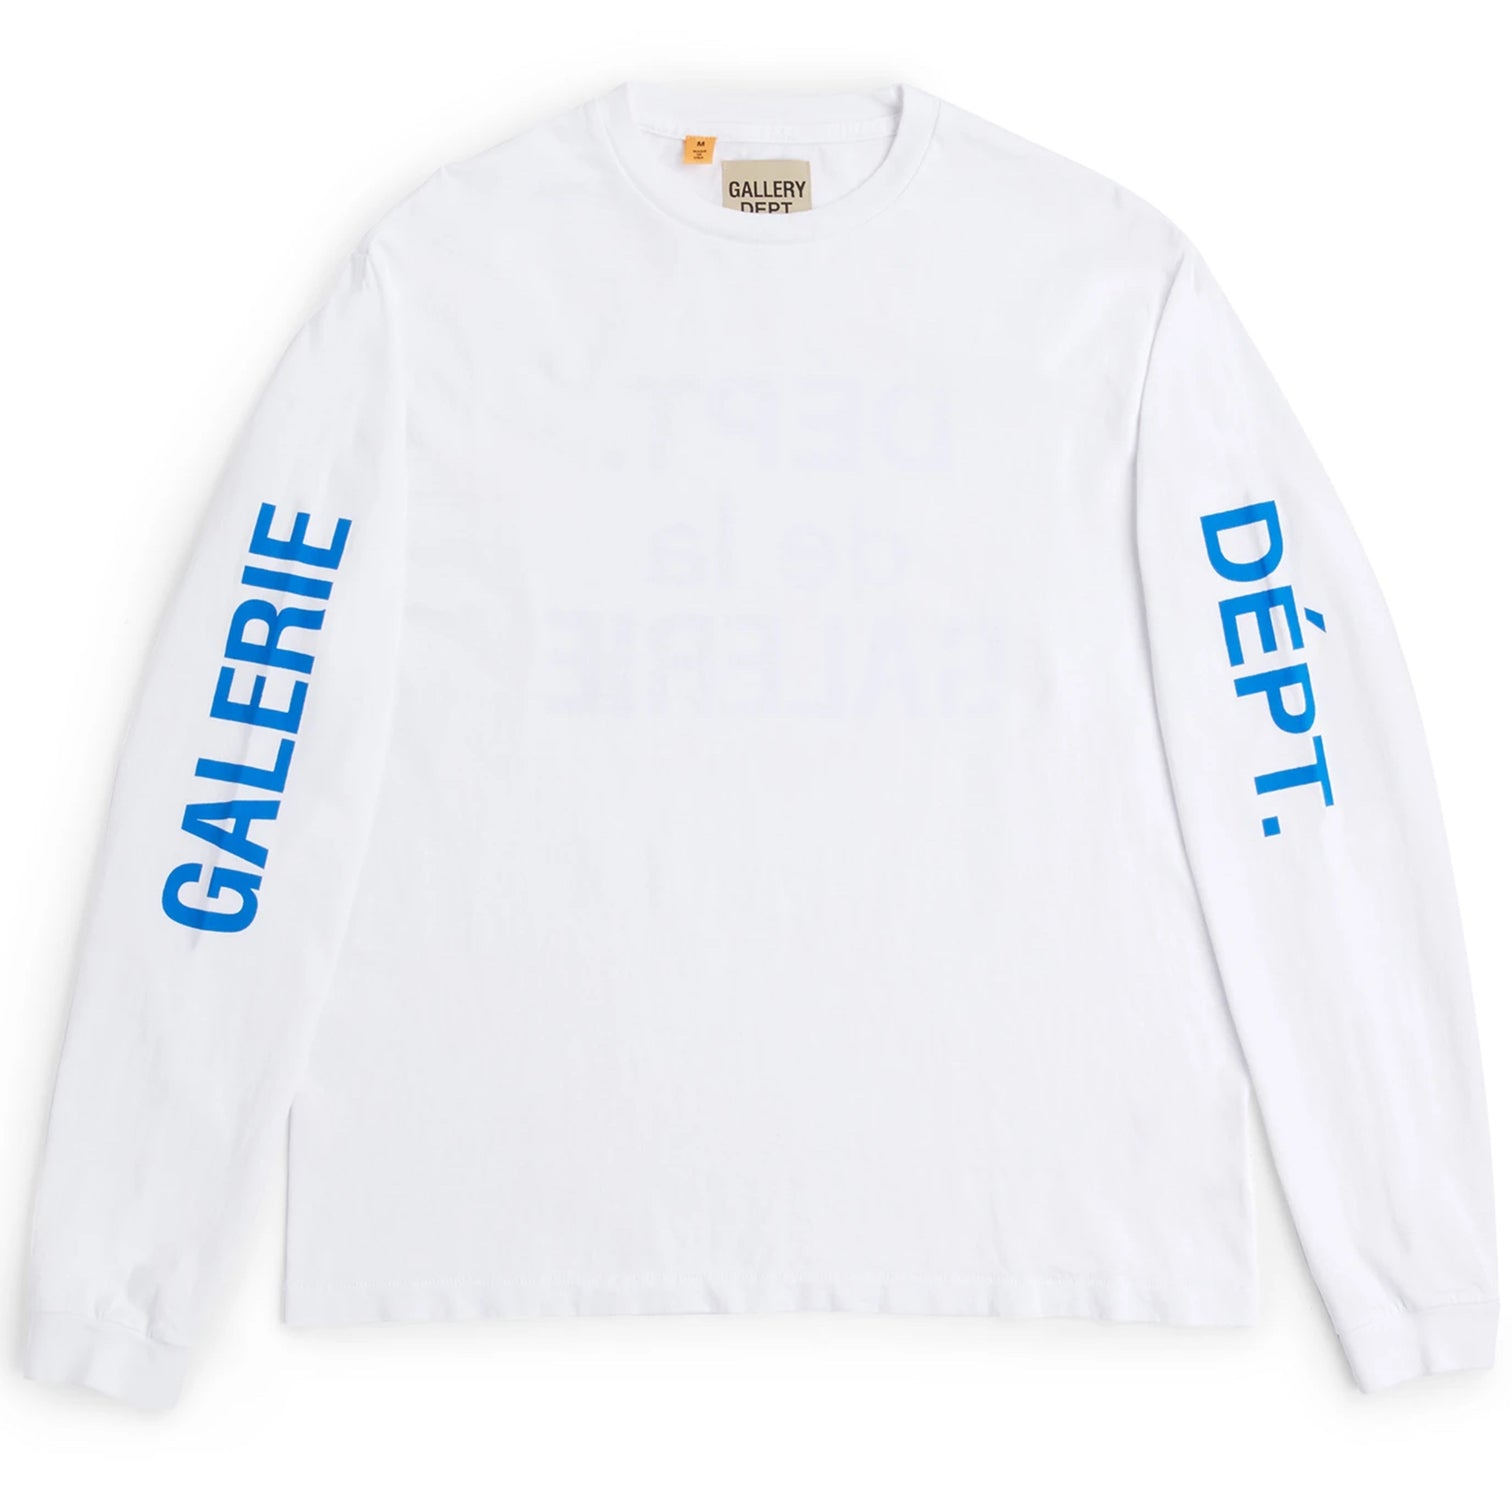 – Gallery online Dept WHITE LONG T-SHIRT - FRENCH SLEEVE COLLECTOR